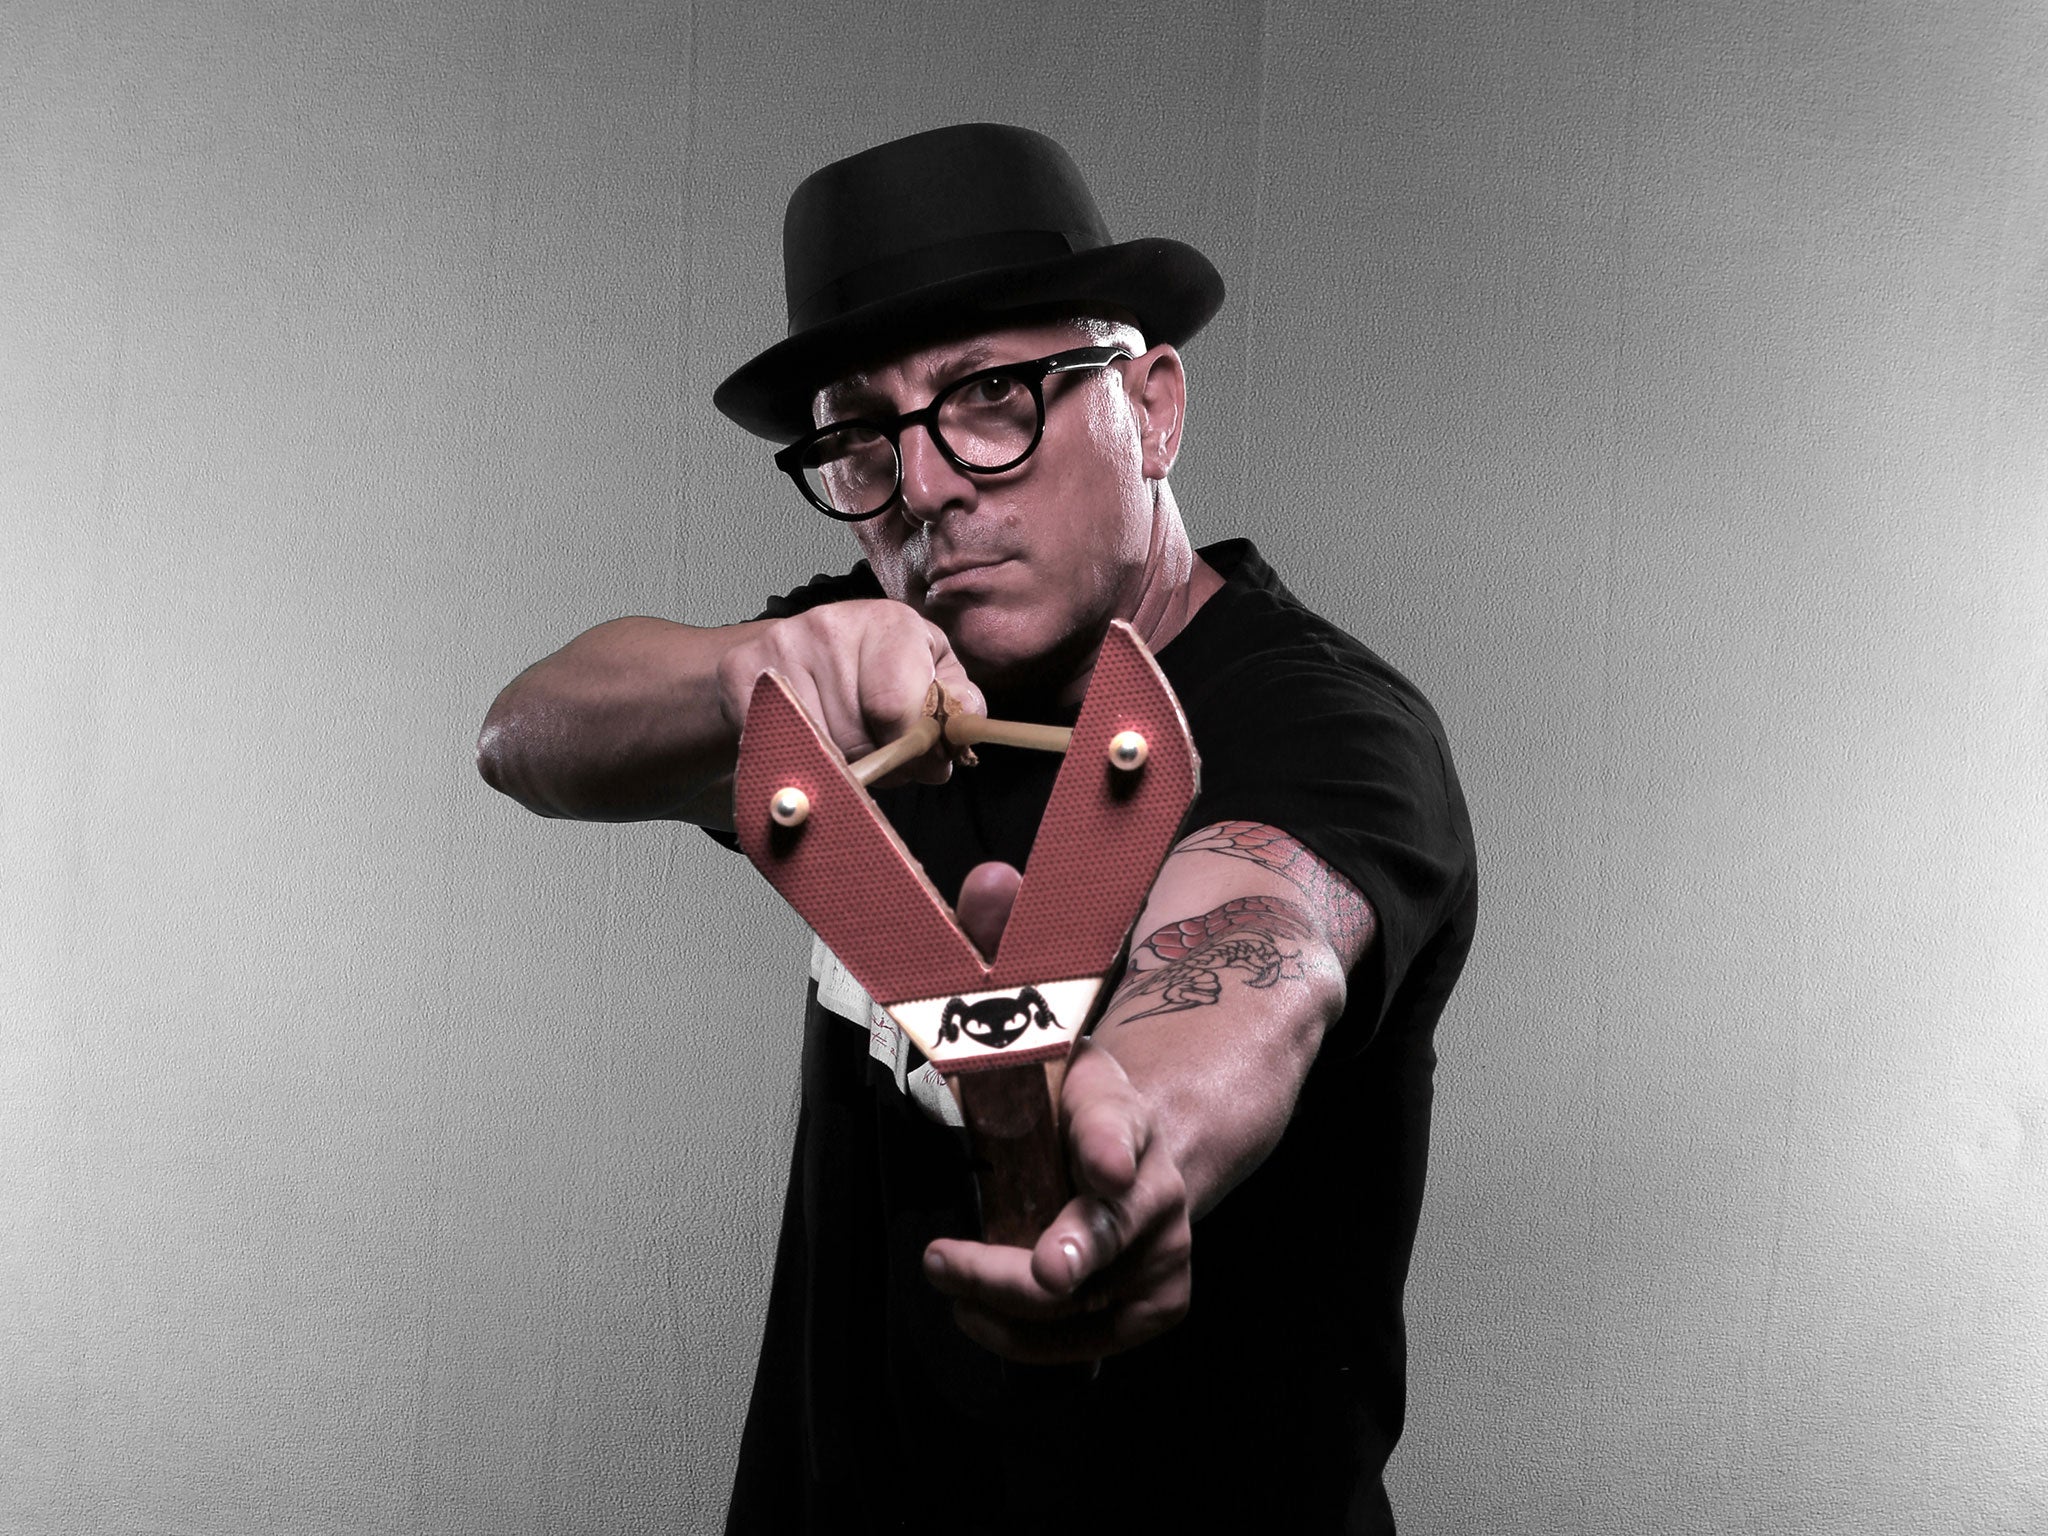 Maynard James Keenan, enigmatic vocalist with Puscifer, Tool and A Perfect Circle